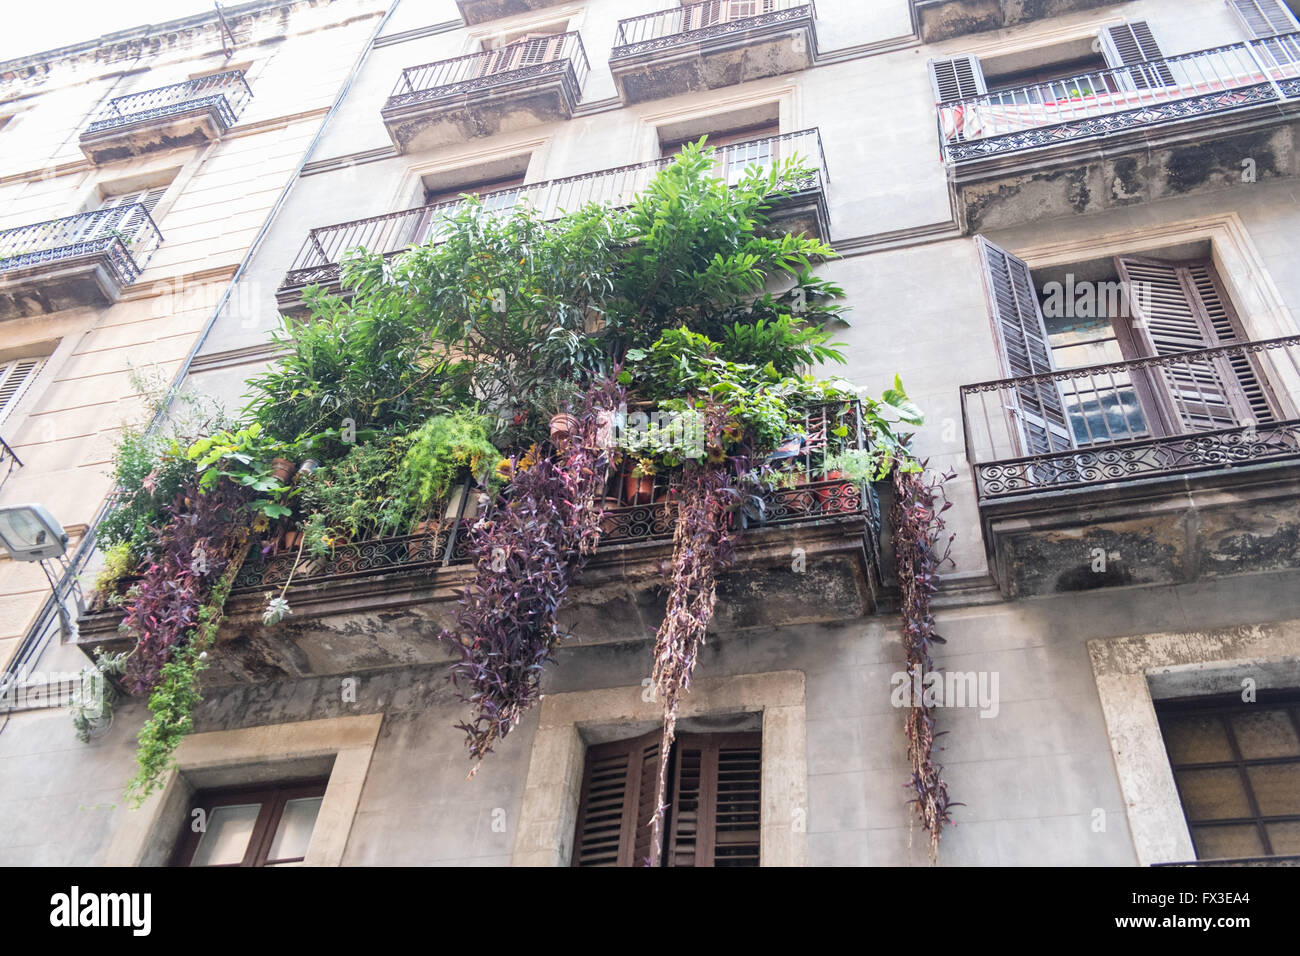 Green fingered balcony covered in hanging plants baskets, in University area,Raval, Barcelona,Catalonia,Spain,Europe. Stock Photo